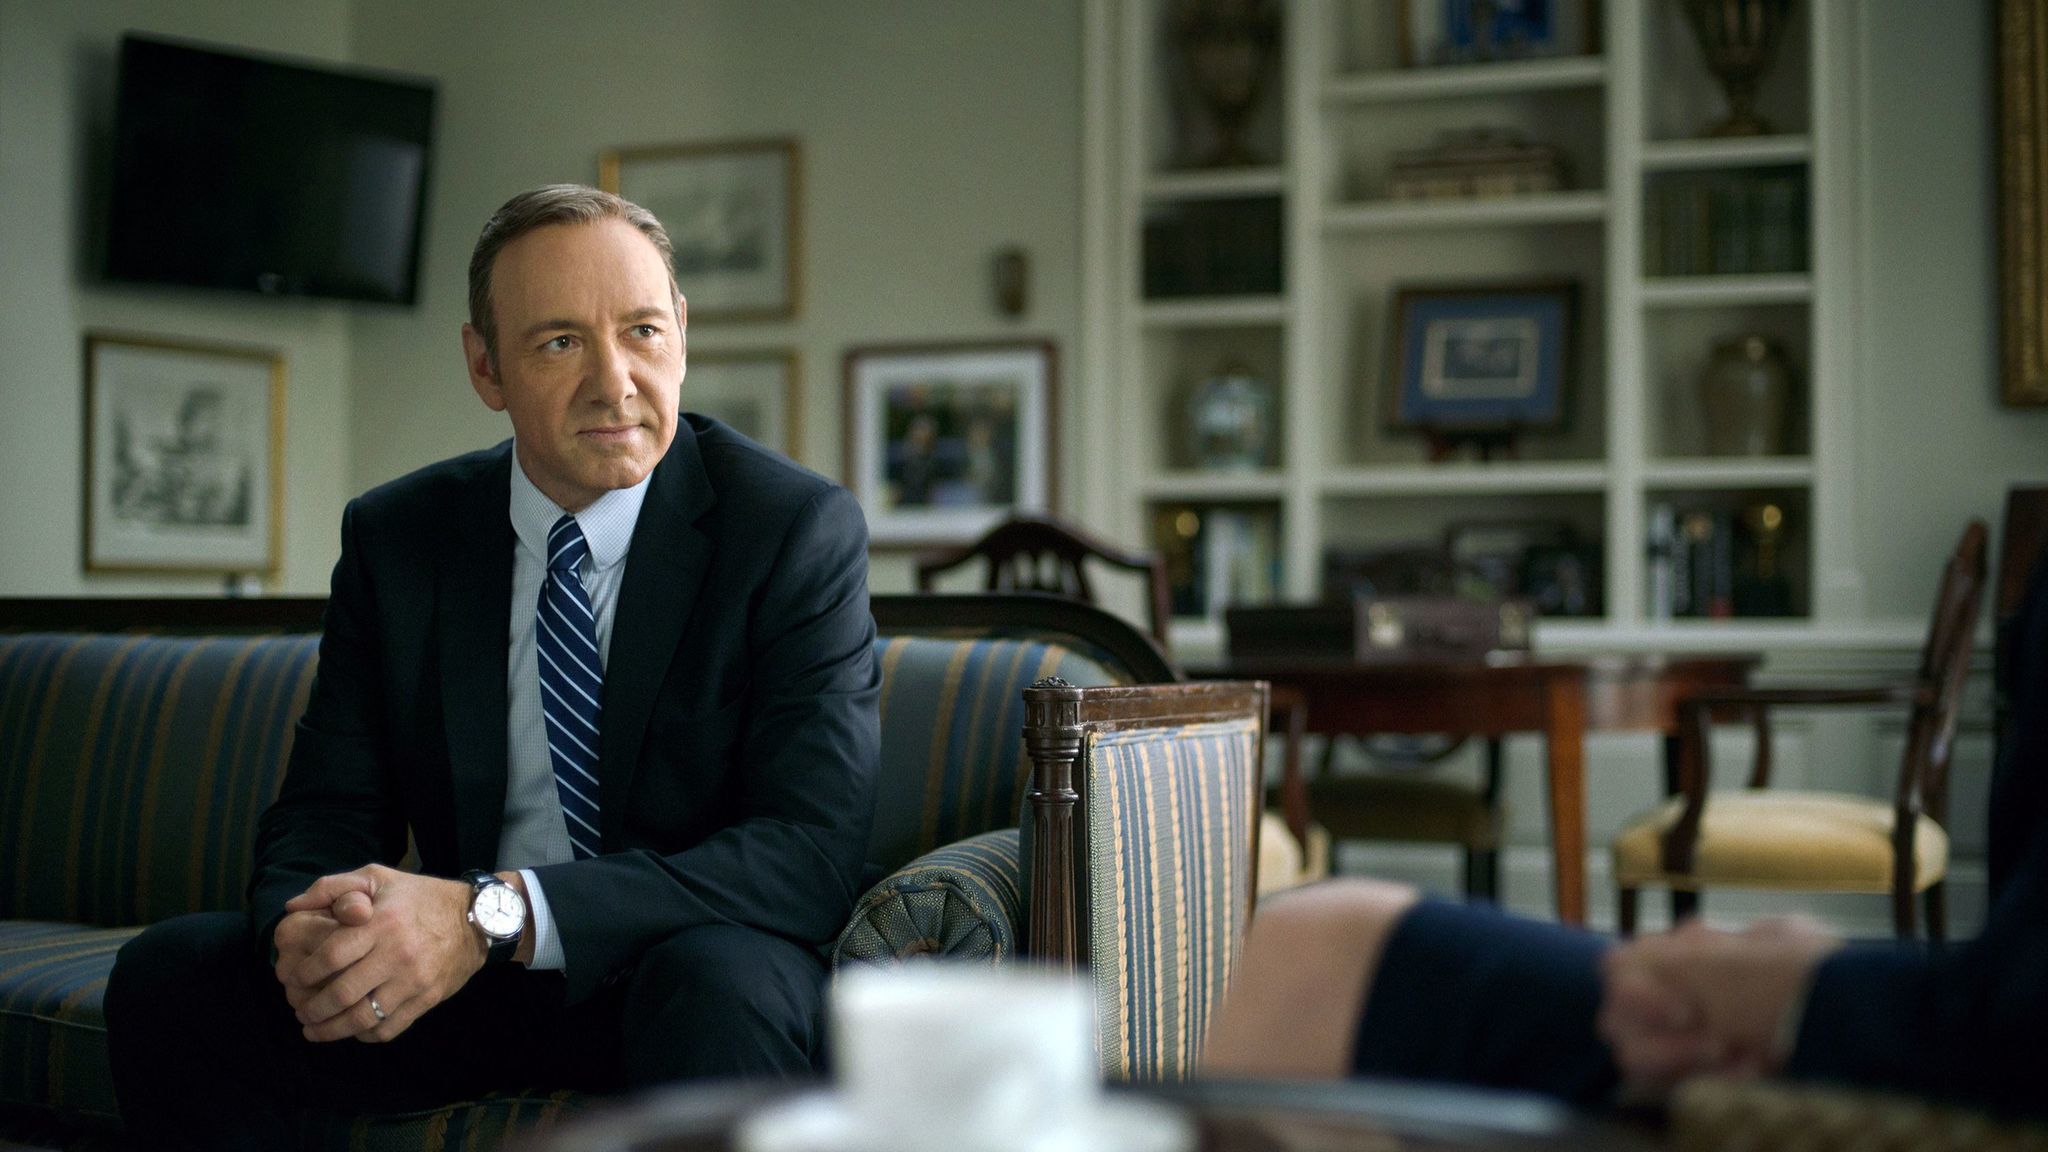 Kevin Spacey in a scene from "House of Cards," which will end its run after its upcoming sixth season. (Netflix)